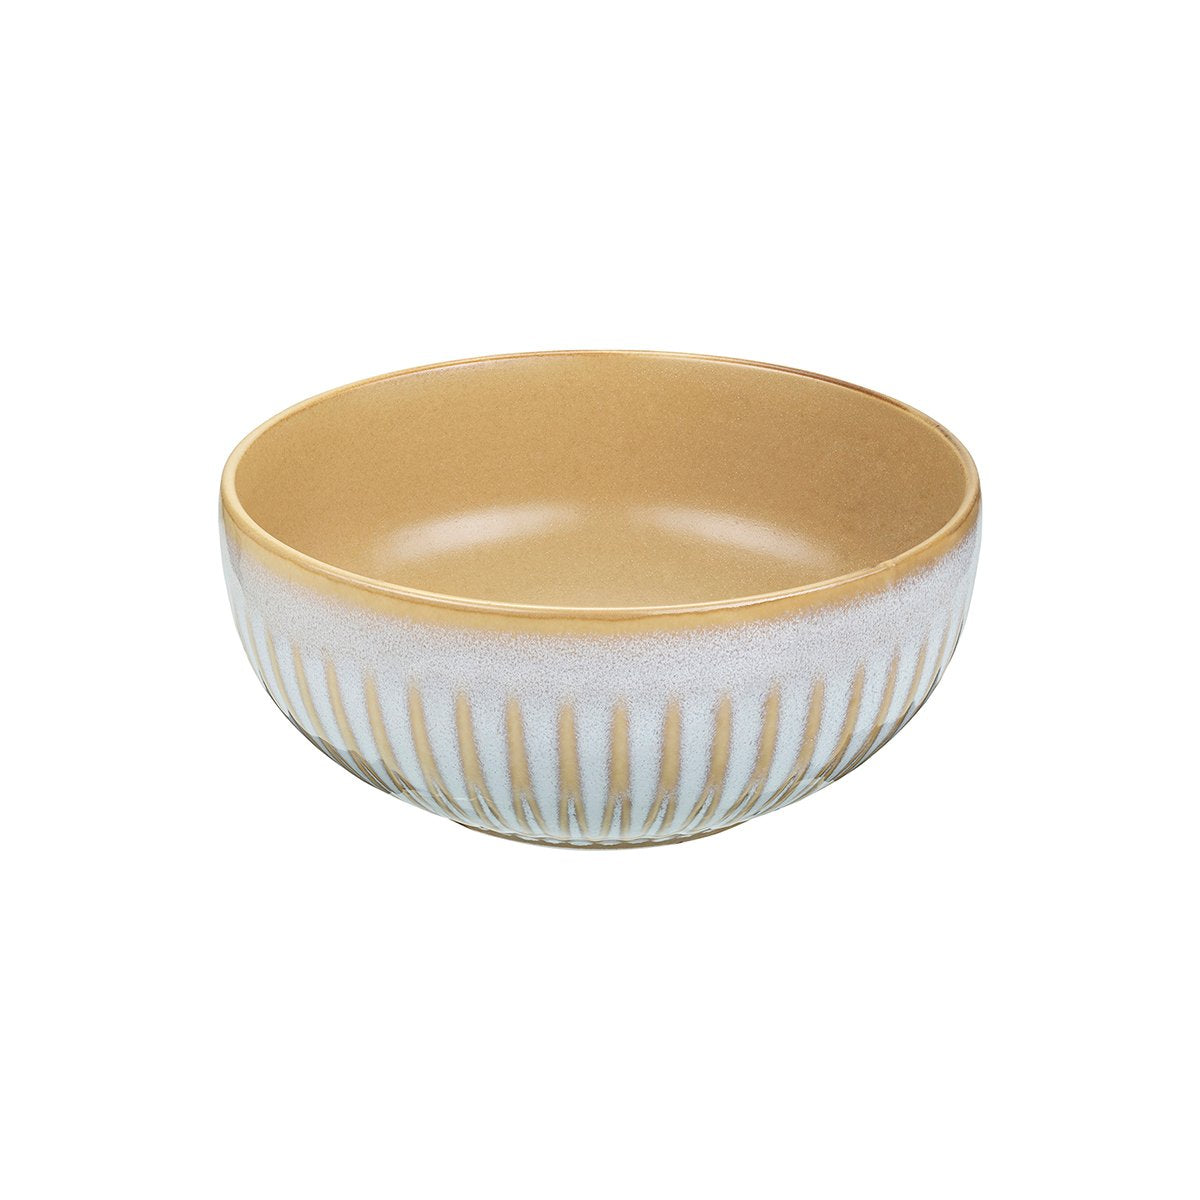 Round Bowl - 713Ml, Almond from Luzerne. made out of Ceramic and sold in boxes of 4. Hospitality quality at wholesale price with The Flying Fork! 